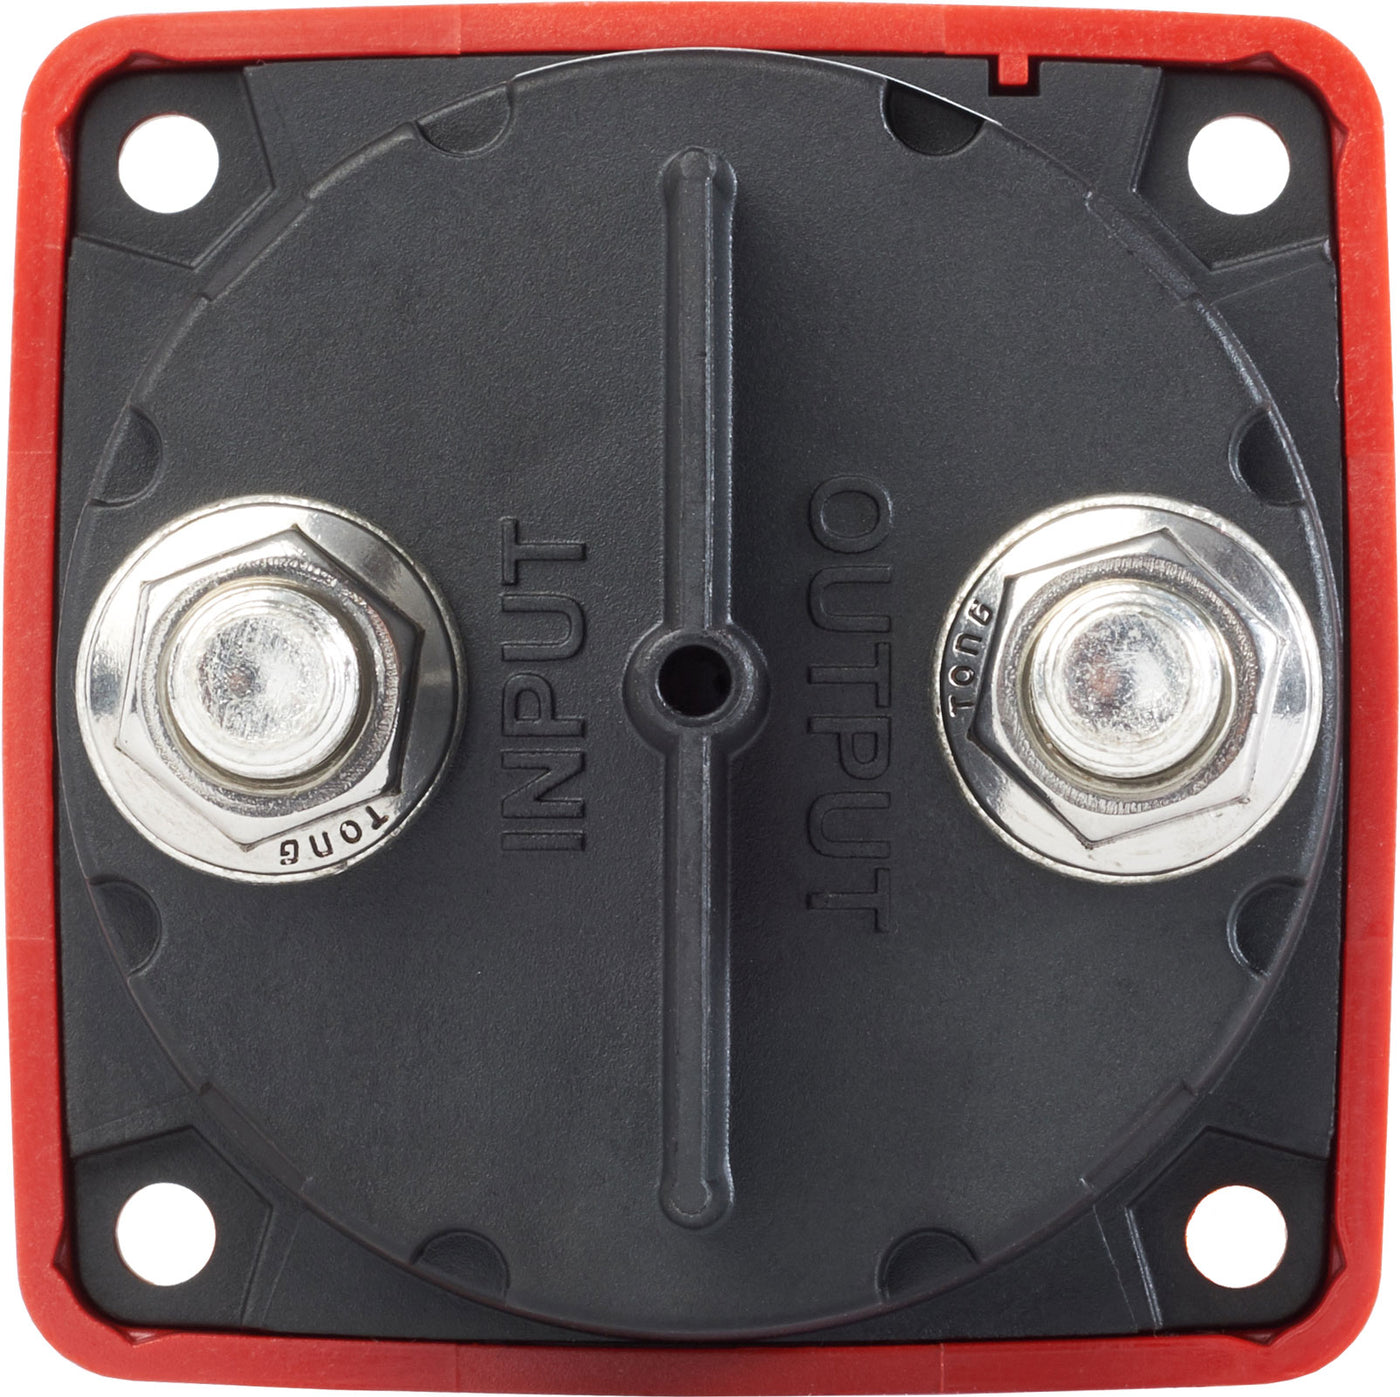 Blue Sea 6005 m-Series Mini On-Off Battery Switch with Key - Red